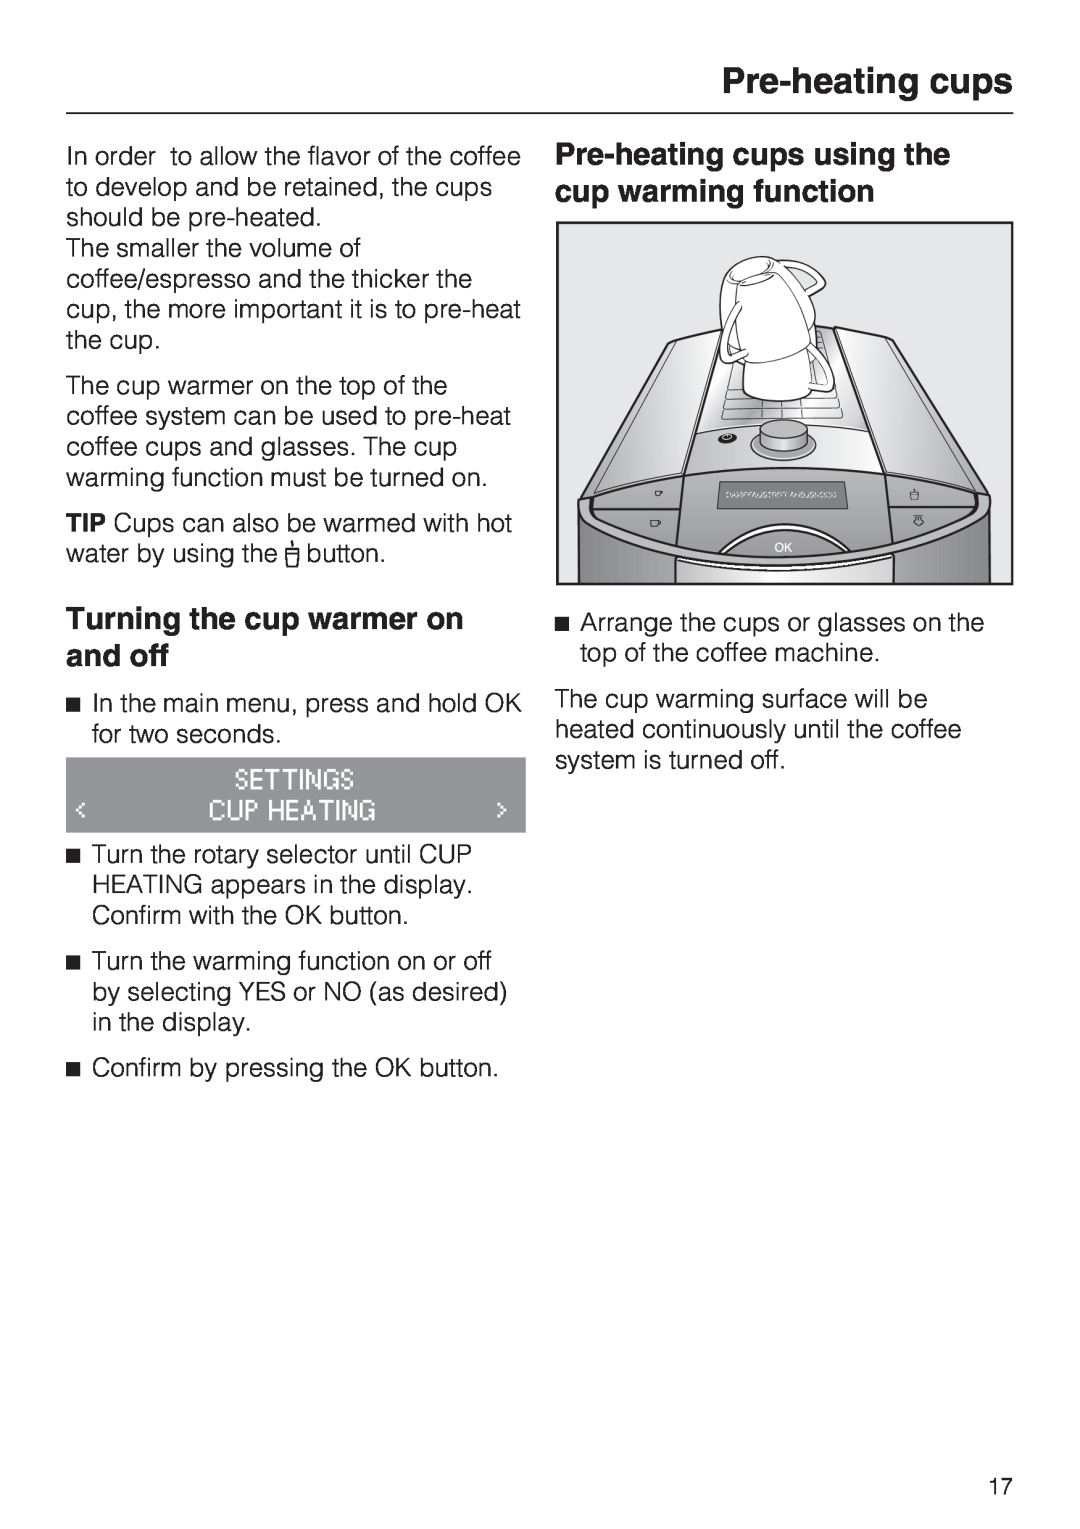 Miele 7995311, CM 5100 manual Turning the cup warmer on and off, Pre-heatingcups using the cup warming function 